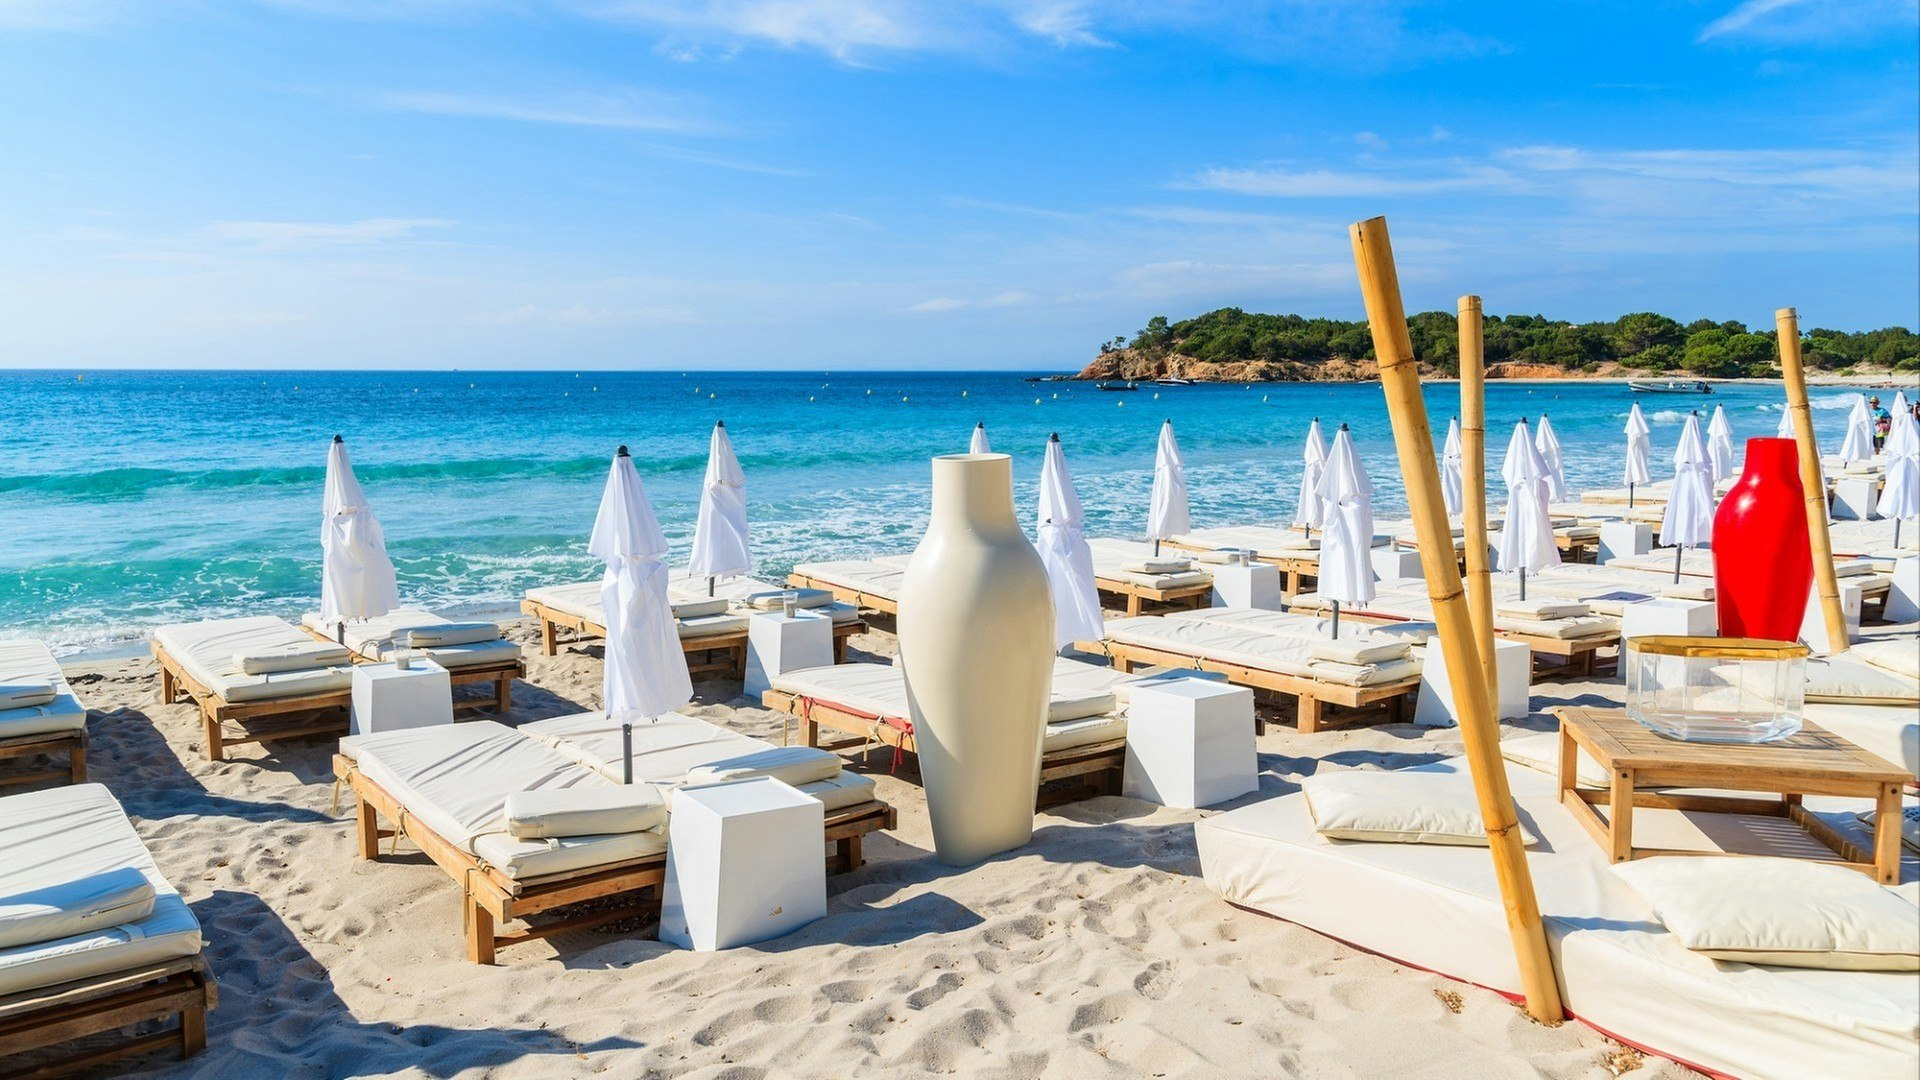 Rows of sunbeds on famous white sand Palombaggia beach, Corsica island, France